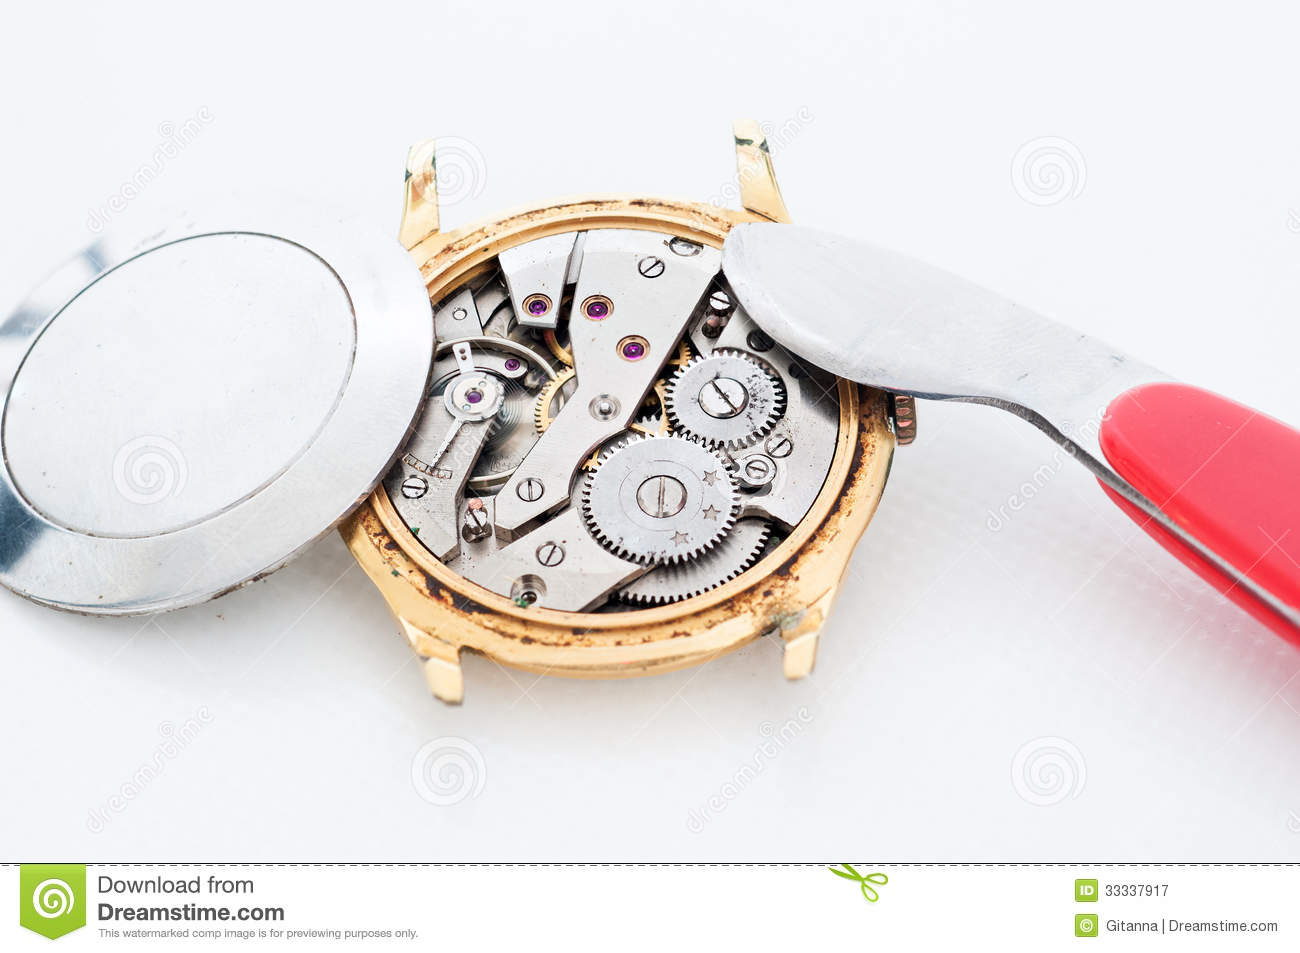 Repair And Restoration Of Watches 